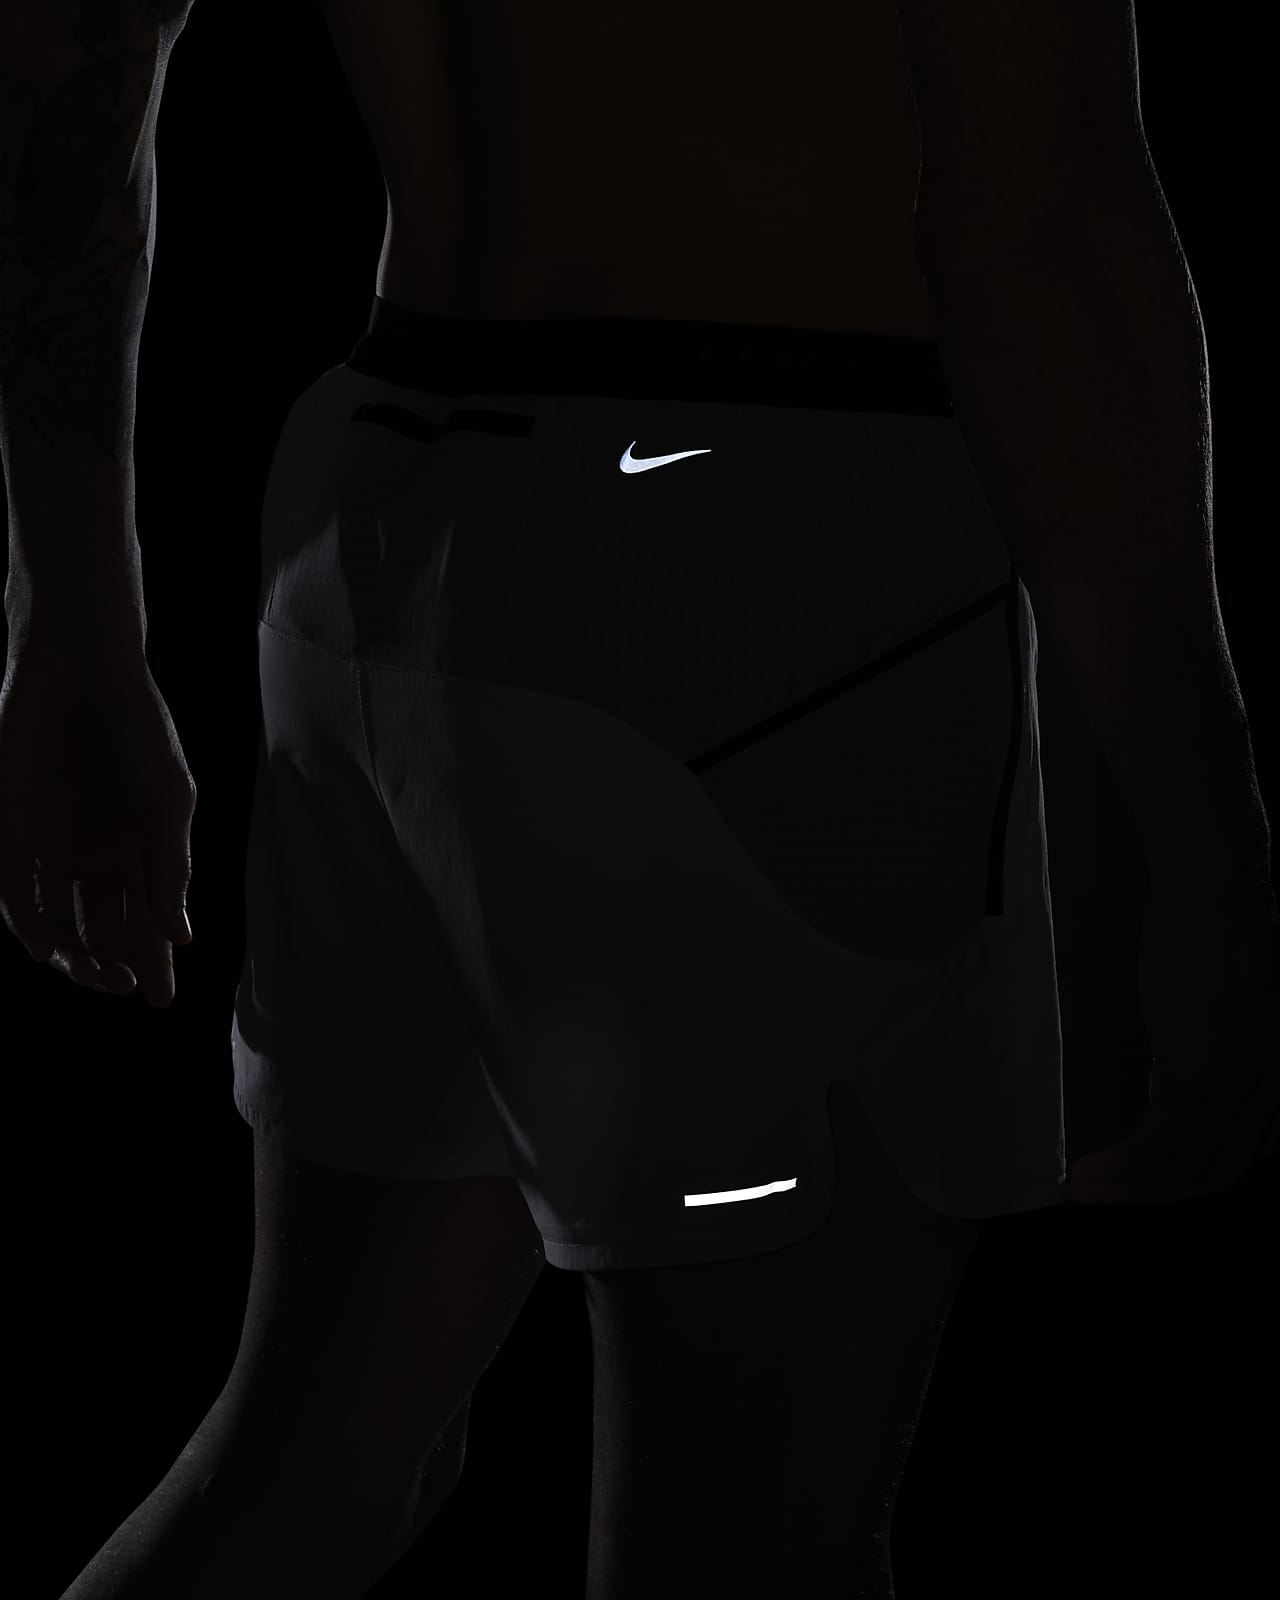 Nike Trail Second Sunrise Men's 13cm (approx.) Brief-Lined Trail Shorts ...